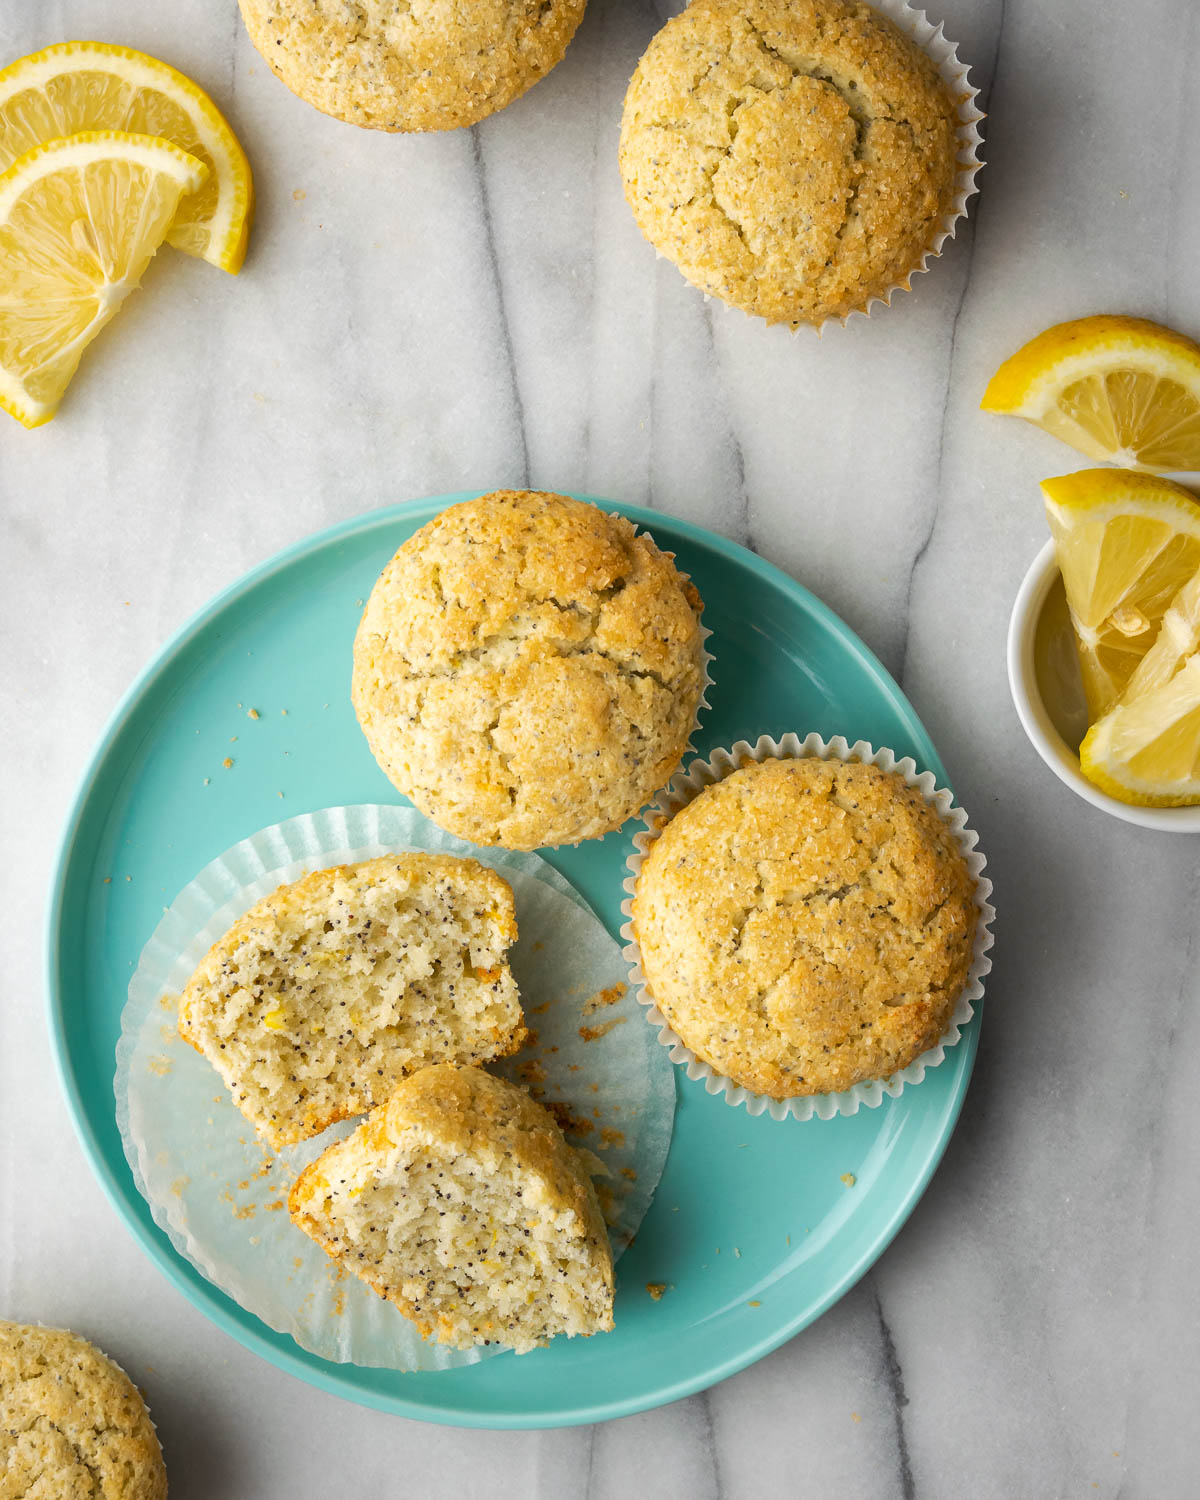 A sliced lemon poppy seed muffin on a blue plate.